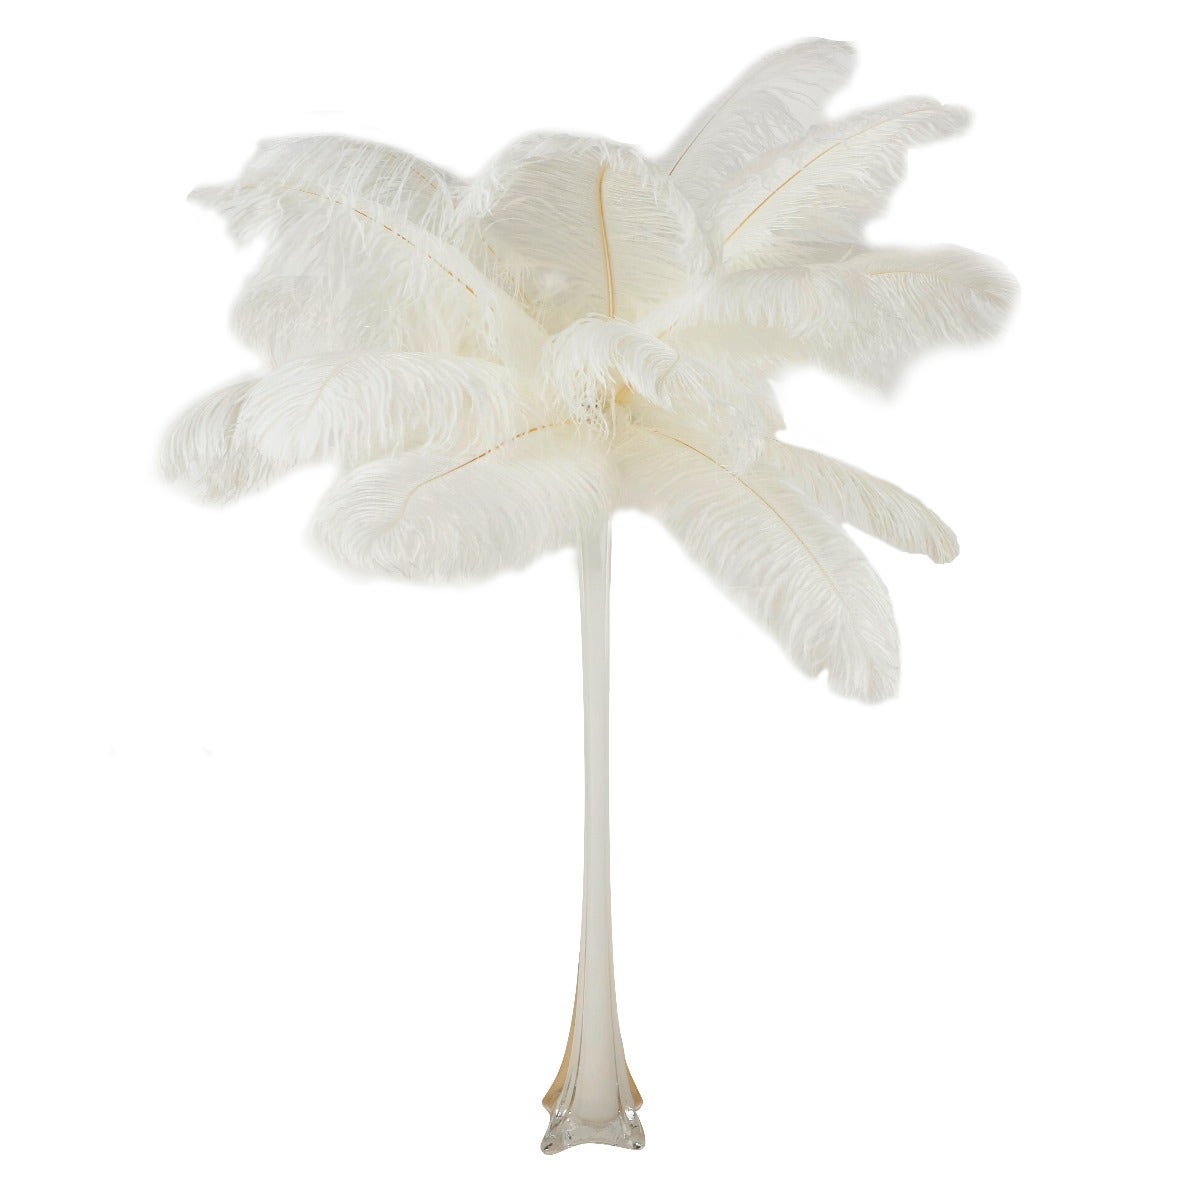 Whimsical White Feather Centerpiece in Wire Vase